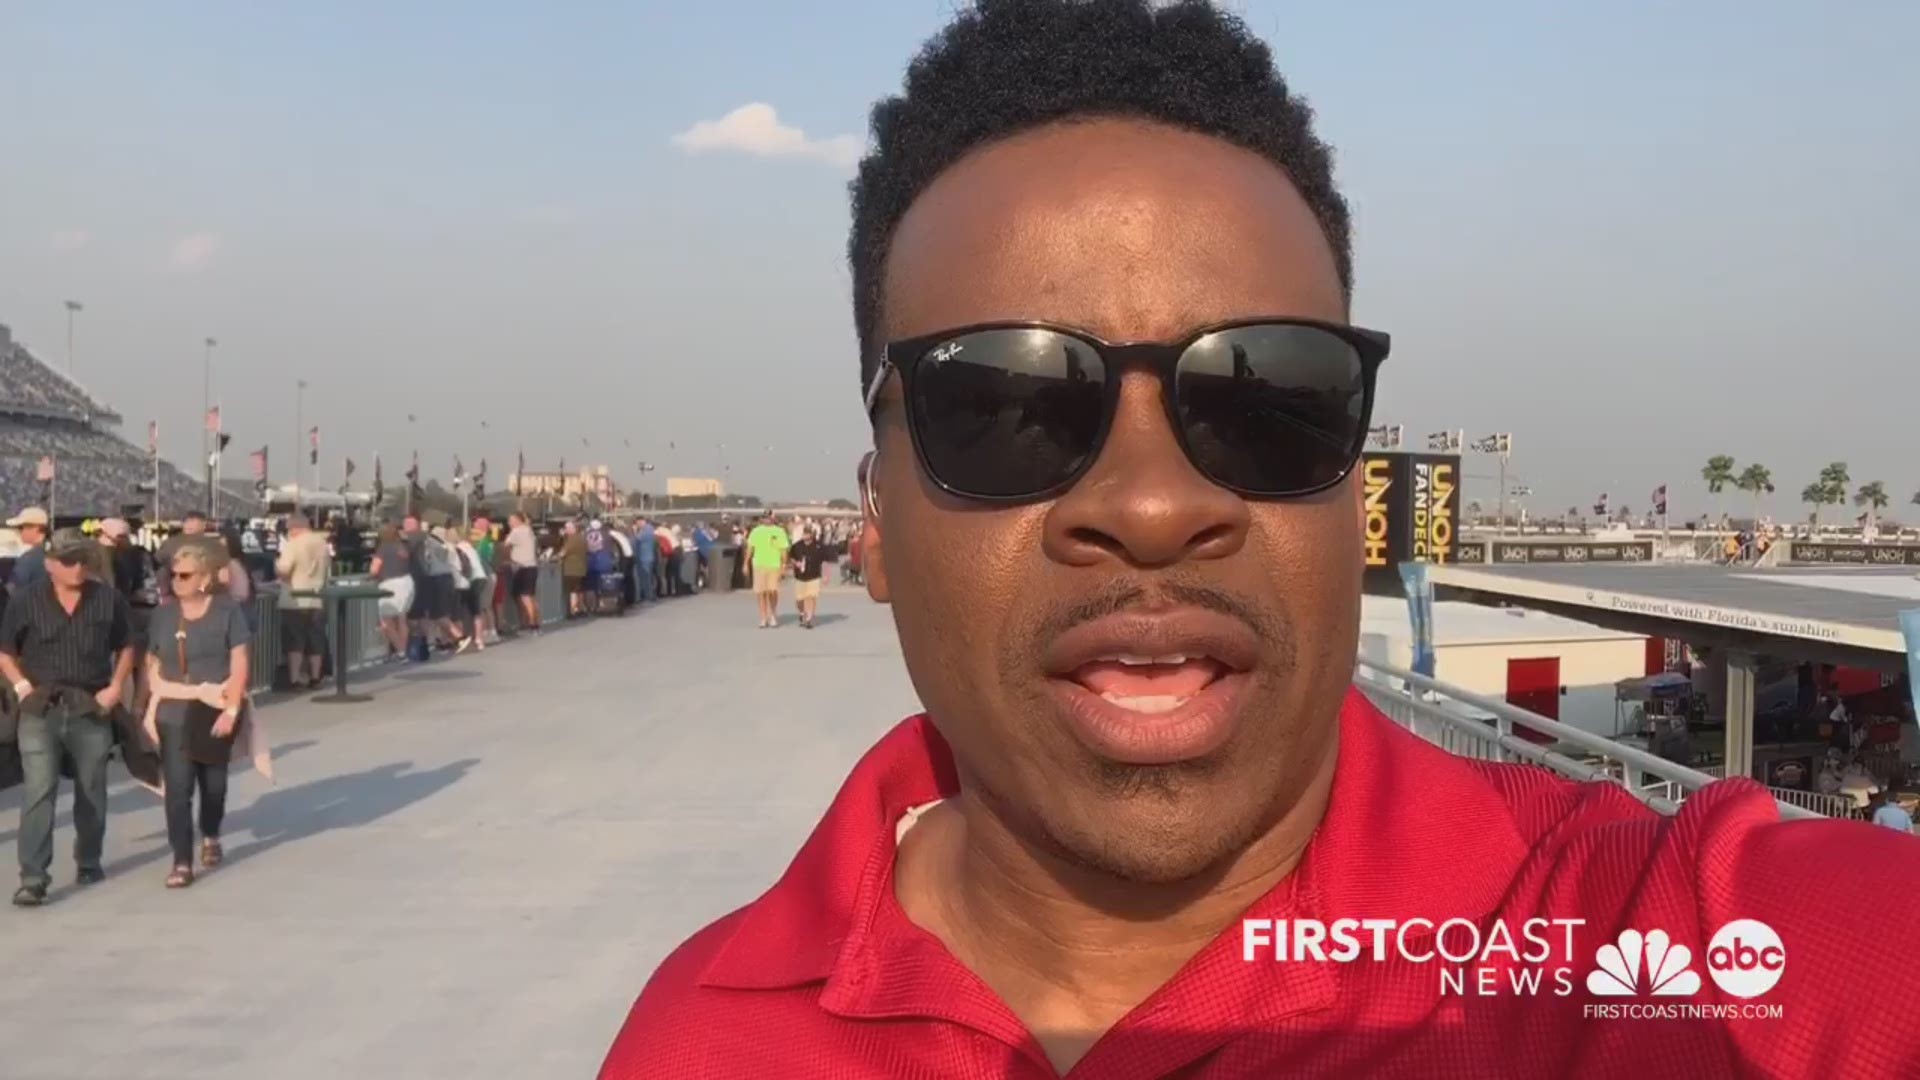 Sports anchor Chris Porter is at the Daytona 500, giving you a look at Preview Day 2.